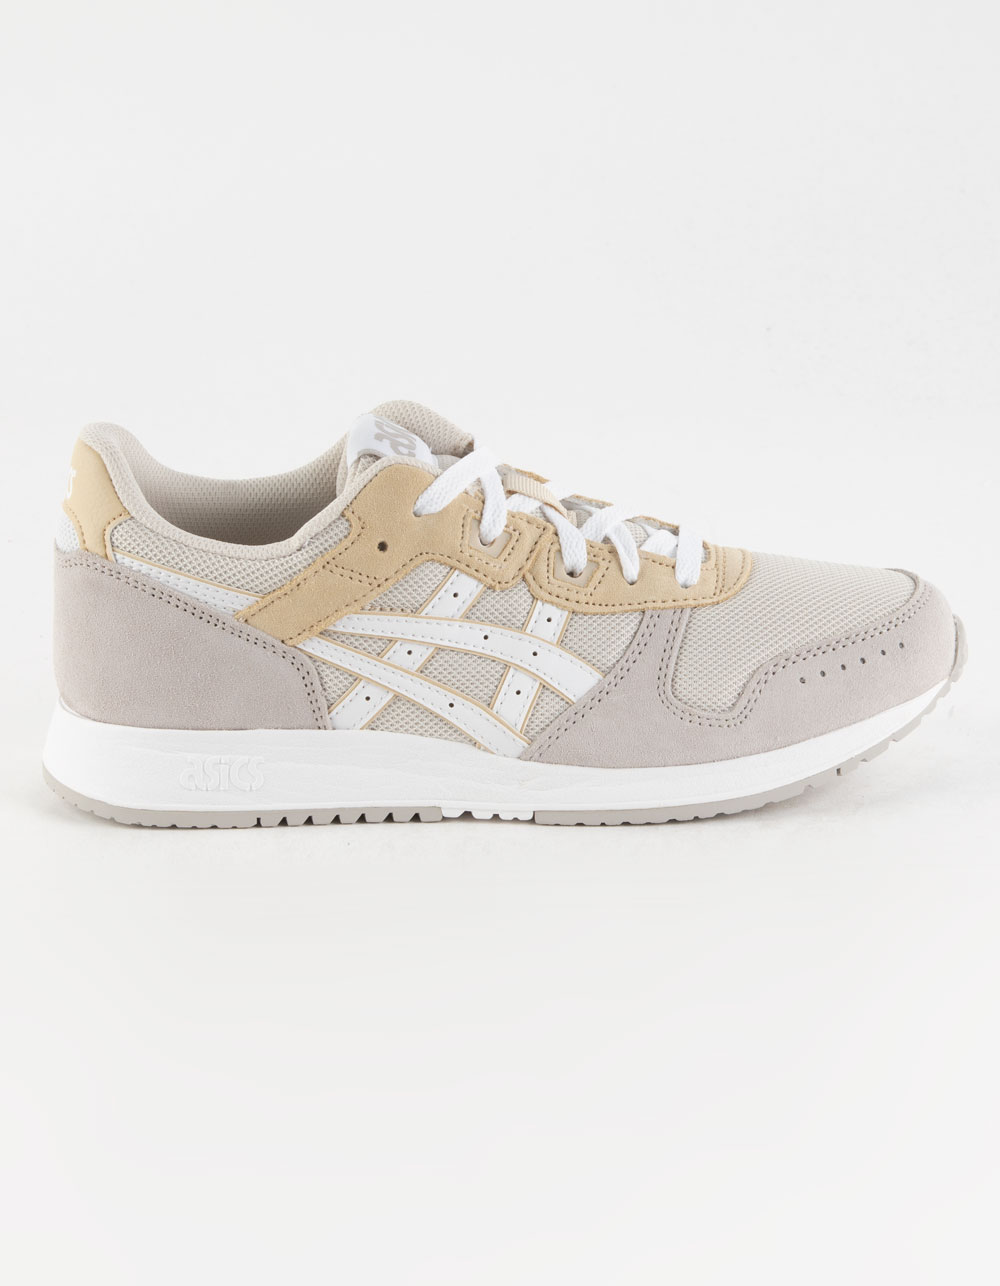 ASICS Lyte Classic Womens Shoes - OFF WHITE | Tillys